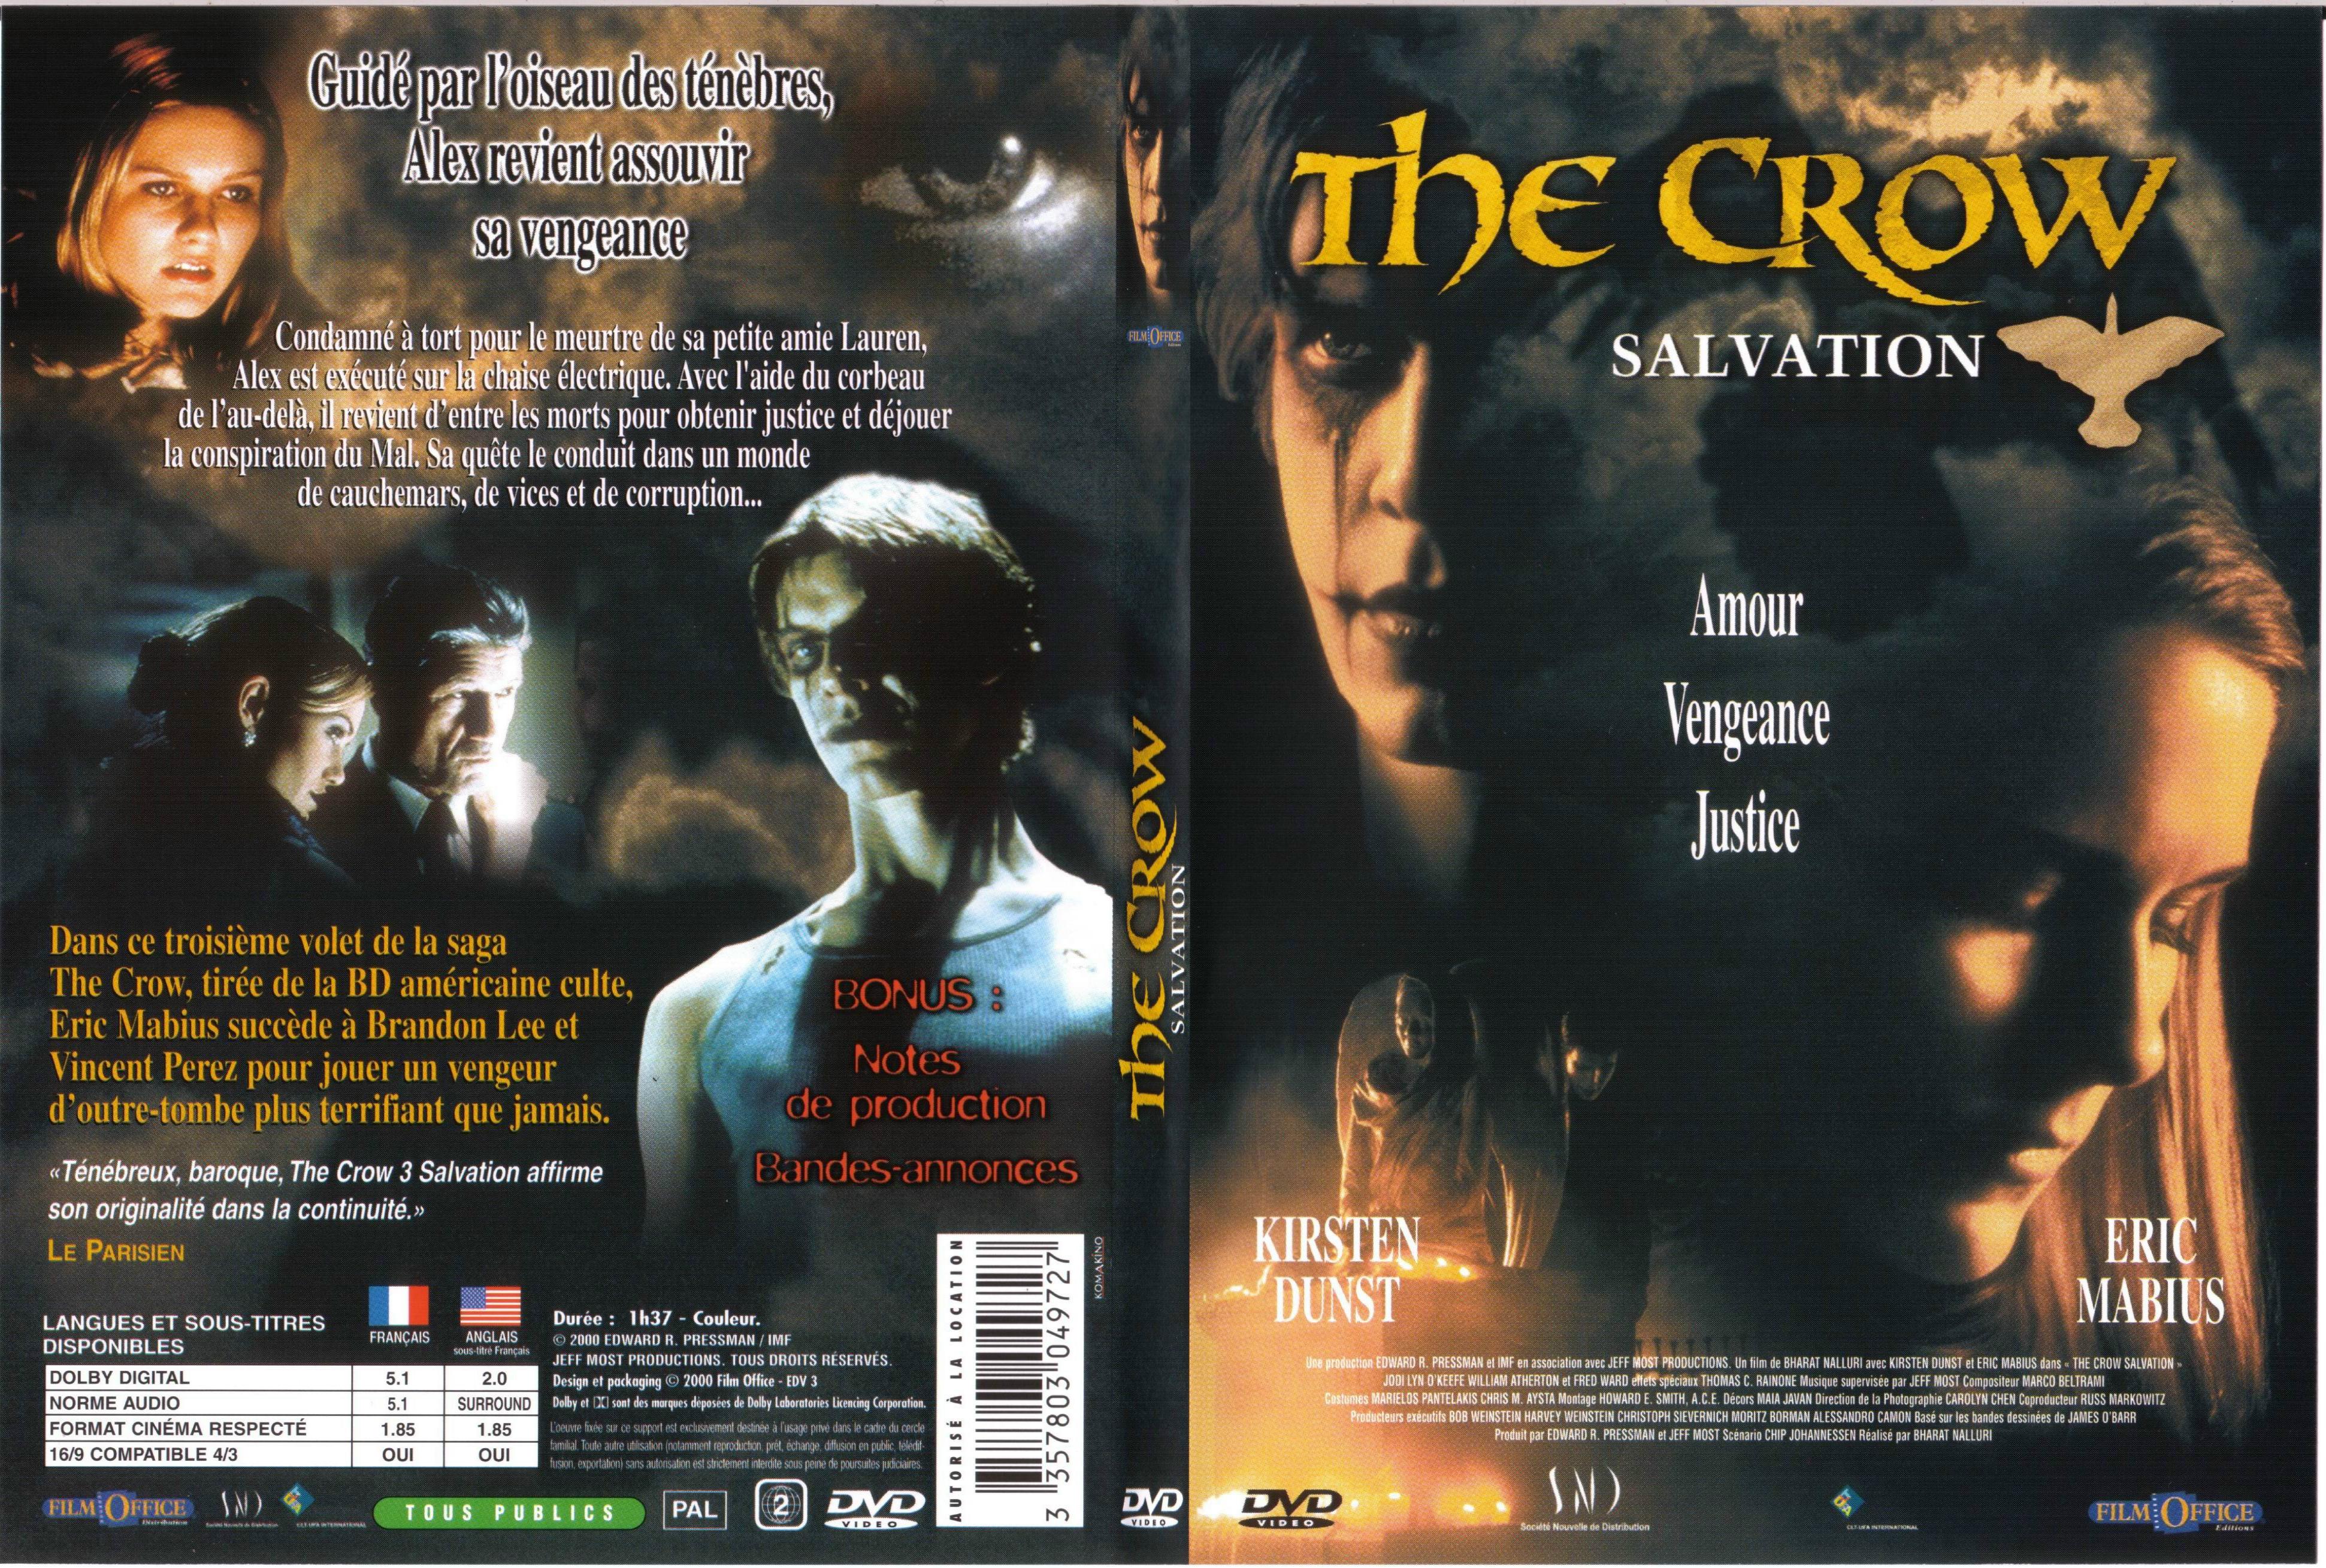 Jaquette DVD The crow salvation - SLIM